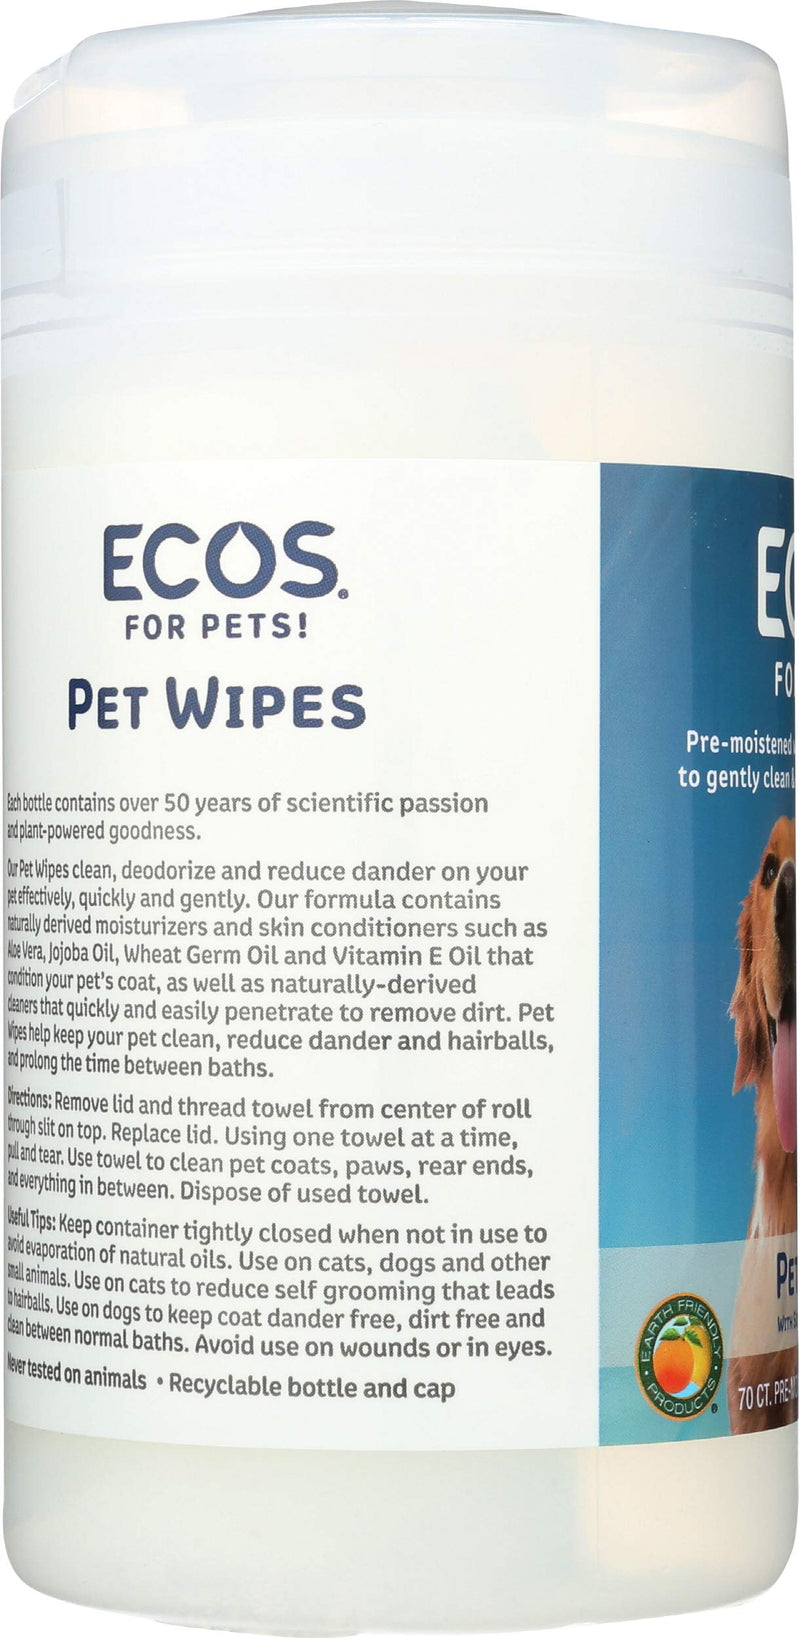 [Australia] - ECOS Natural Pet Wipes, Pre-Moistened Towels, 70-Count Container 